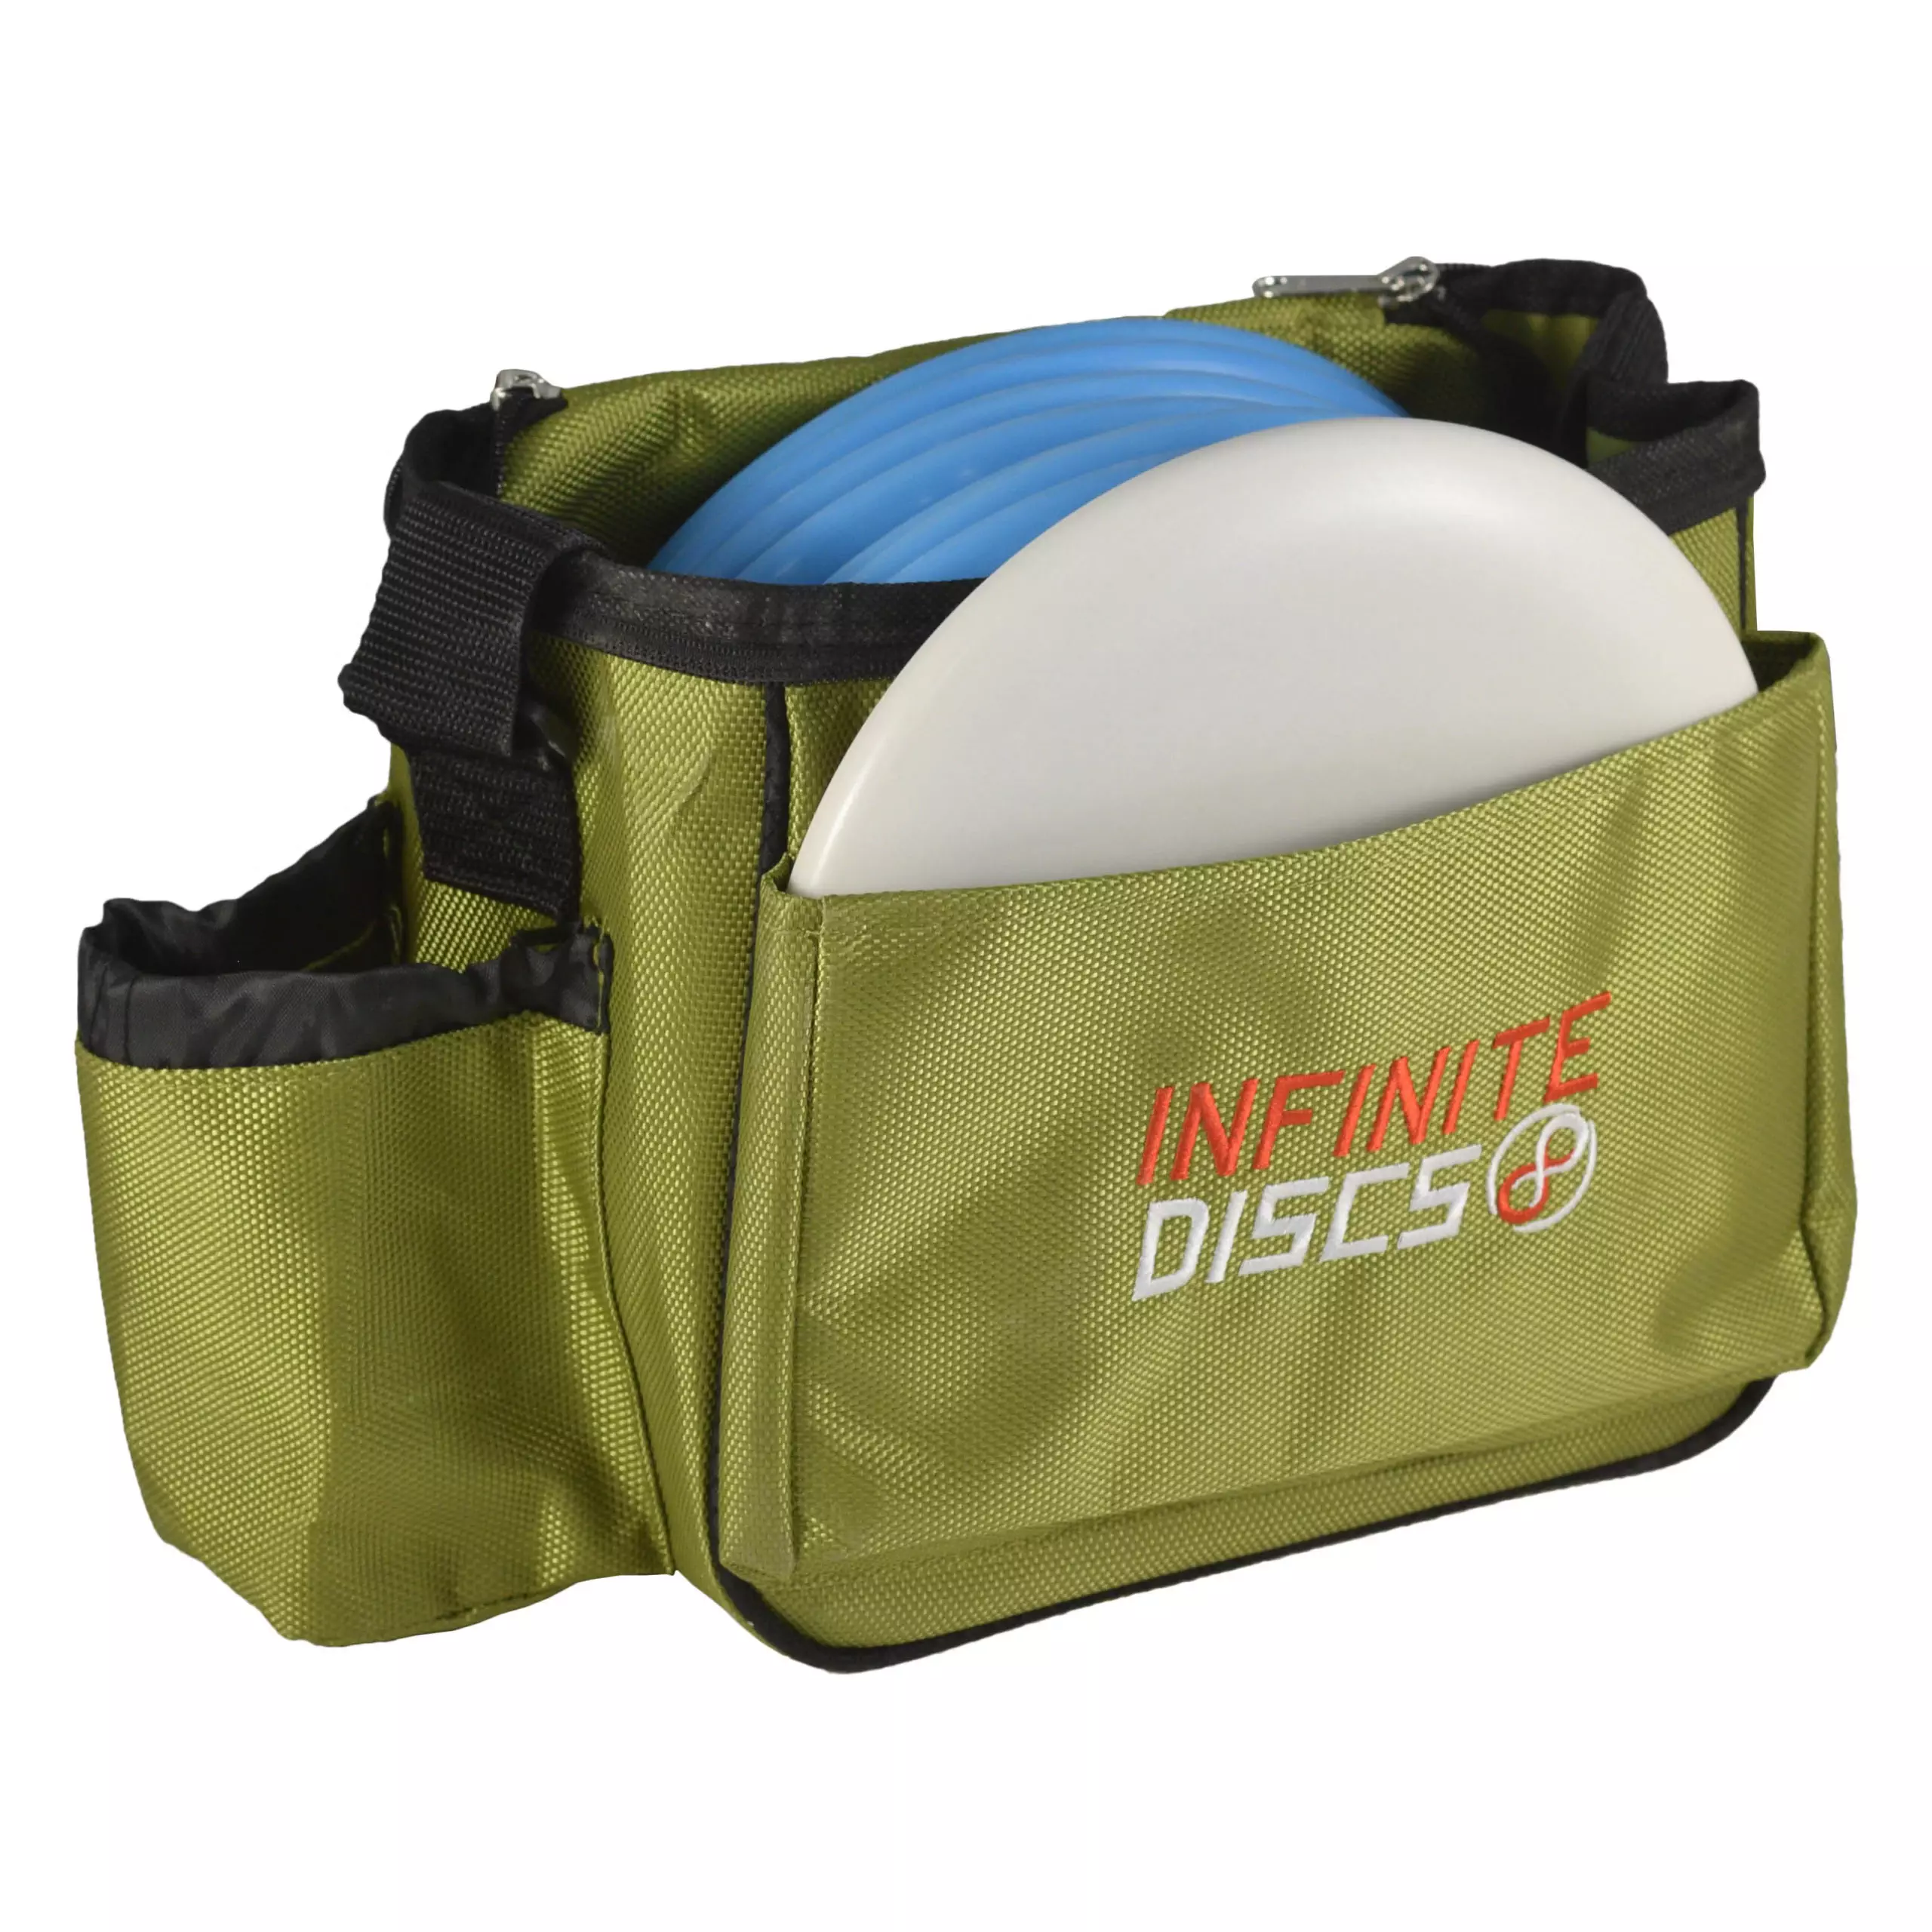 45c7959b e5aa 5d48 a953 9e100705f007 scaled This simple, beginner friendly bag is the perfect entry-level bag for those who are giving the game of disc golf a try. This bag is built to last for years of usage. The bag features a quality zipper, and durable 1680 denier nylon. It holds 8-10 discs and includes a pocket for Mini Disc Marker, a Pencil Holder Slot, a Drink holder with drawstring and a putter pocket for quick access to your putters.